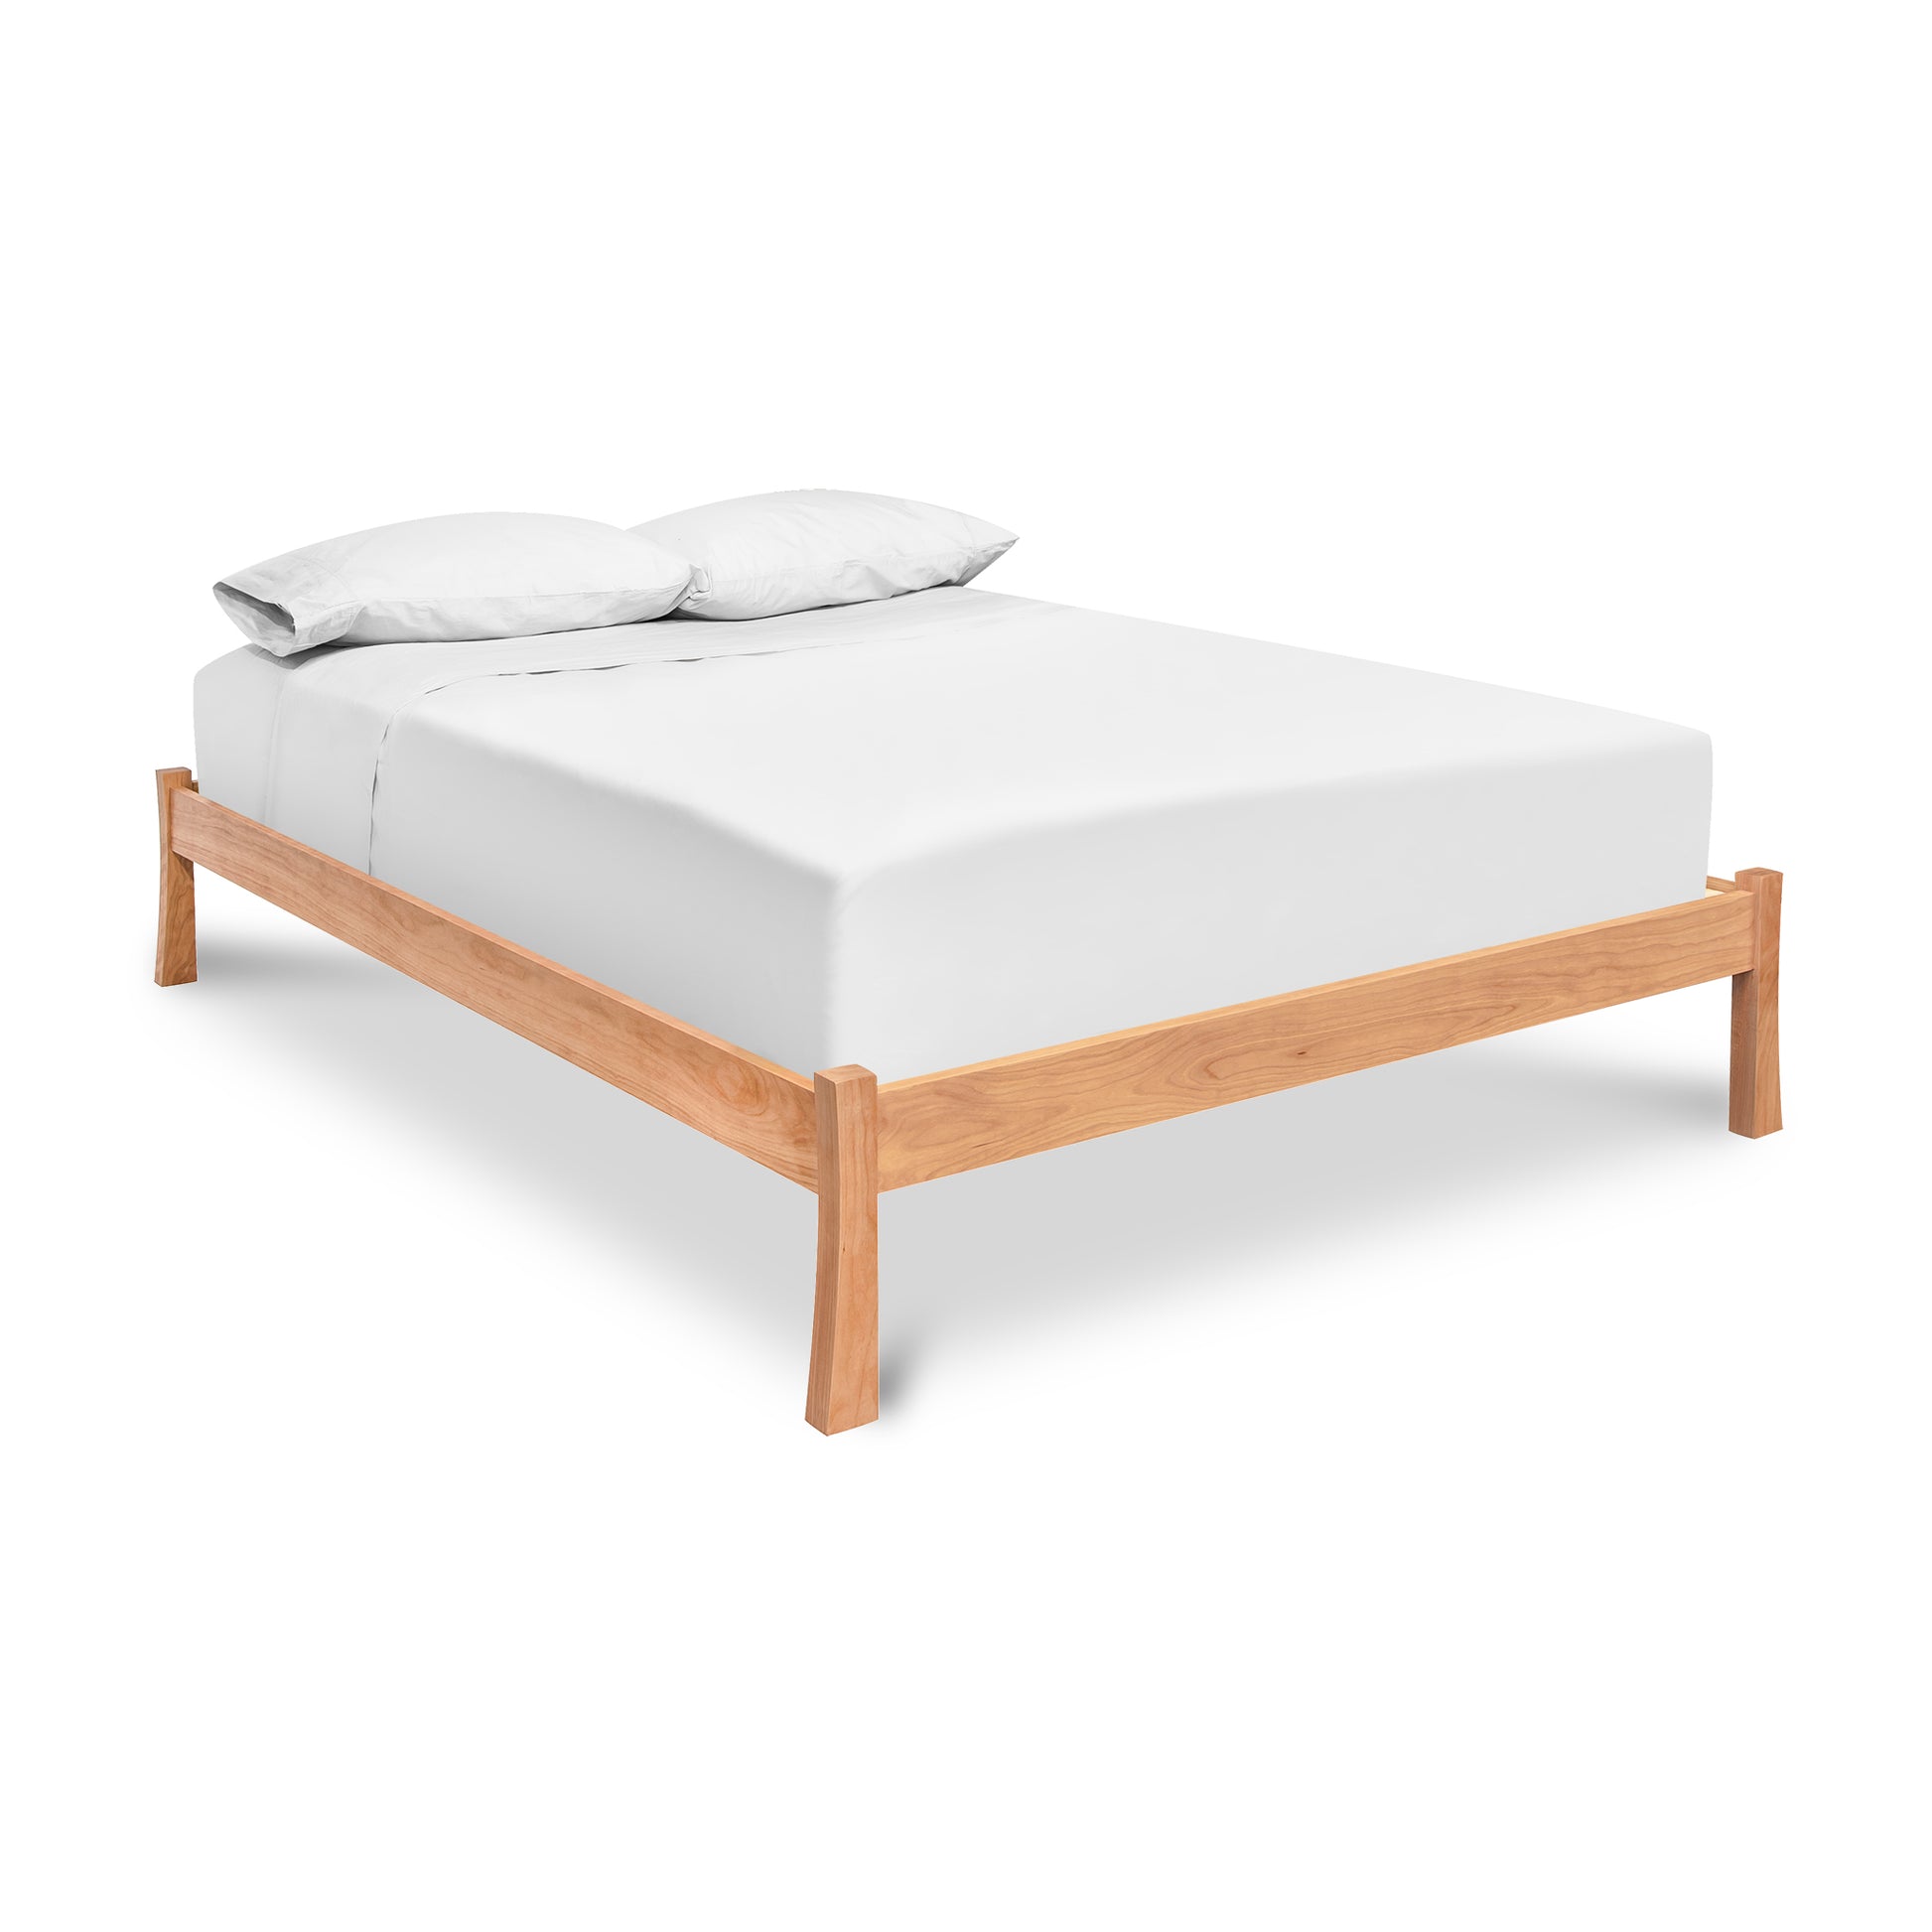 A Vermont Furniture Designs Contemporary Craftsman Studio-Style Platform Bed with white bedding isolated on a white background.